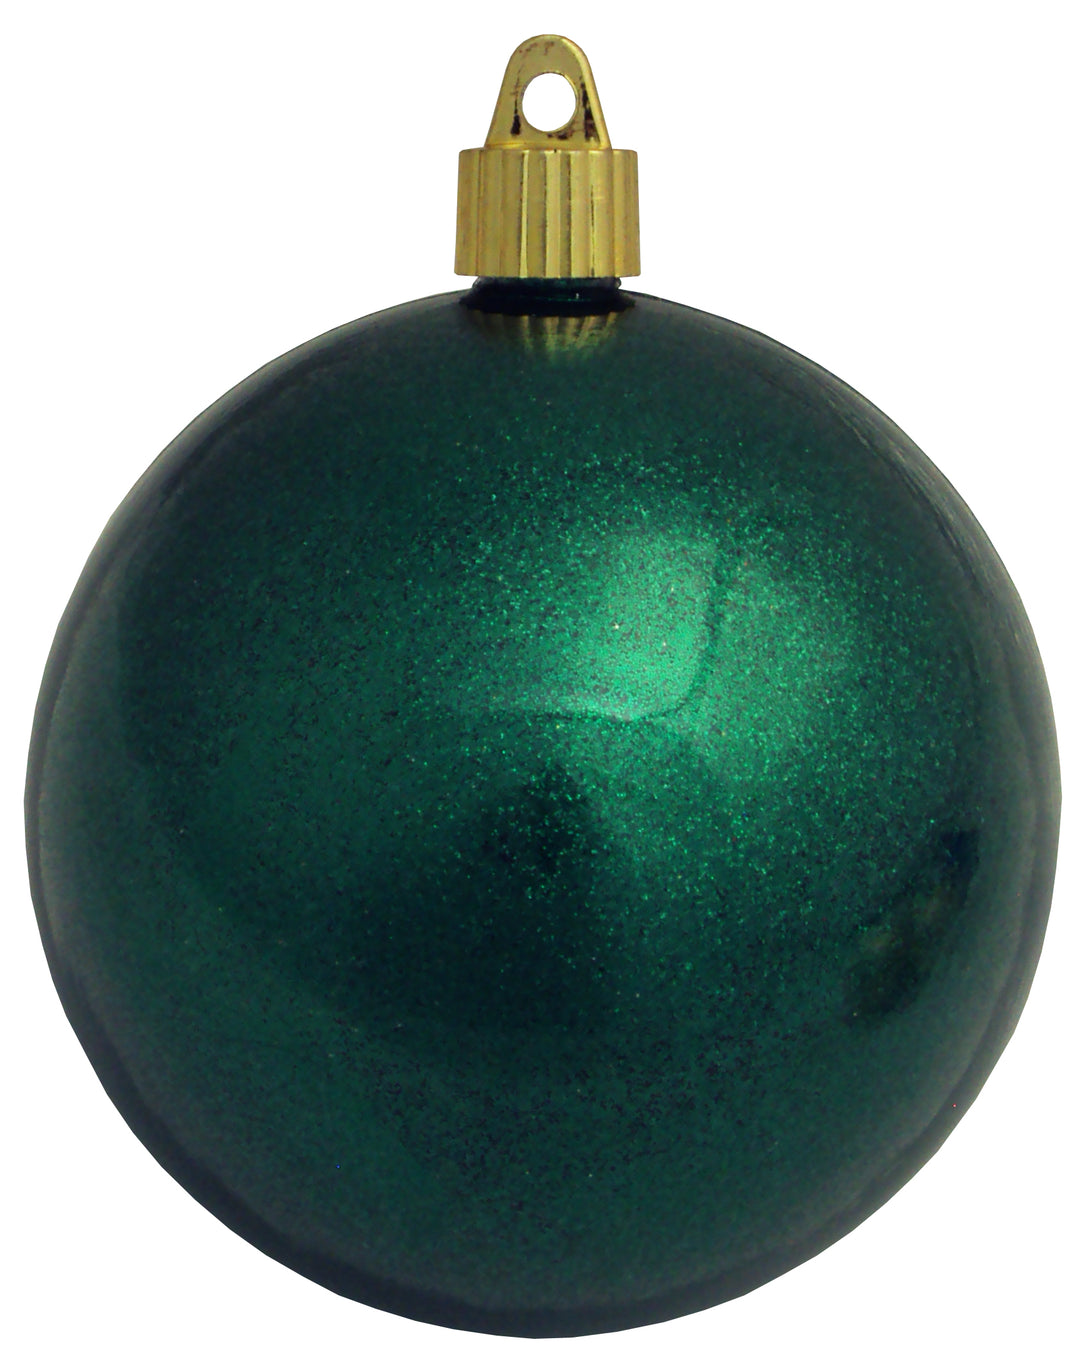 Christmas By Krebs 4" (100mm) Green Sparkle [4 Pieces] Solid Commercial Grade Indoor and Outdoor Shatterproof Plastic, Water Resistant Ball Ornament Decorations